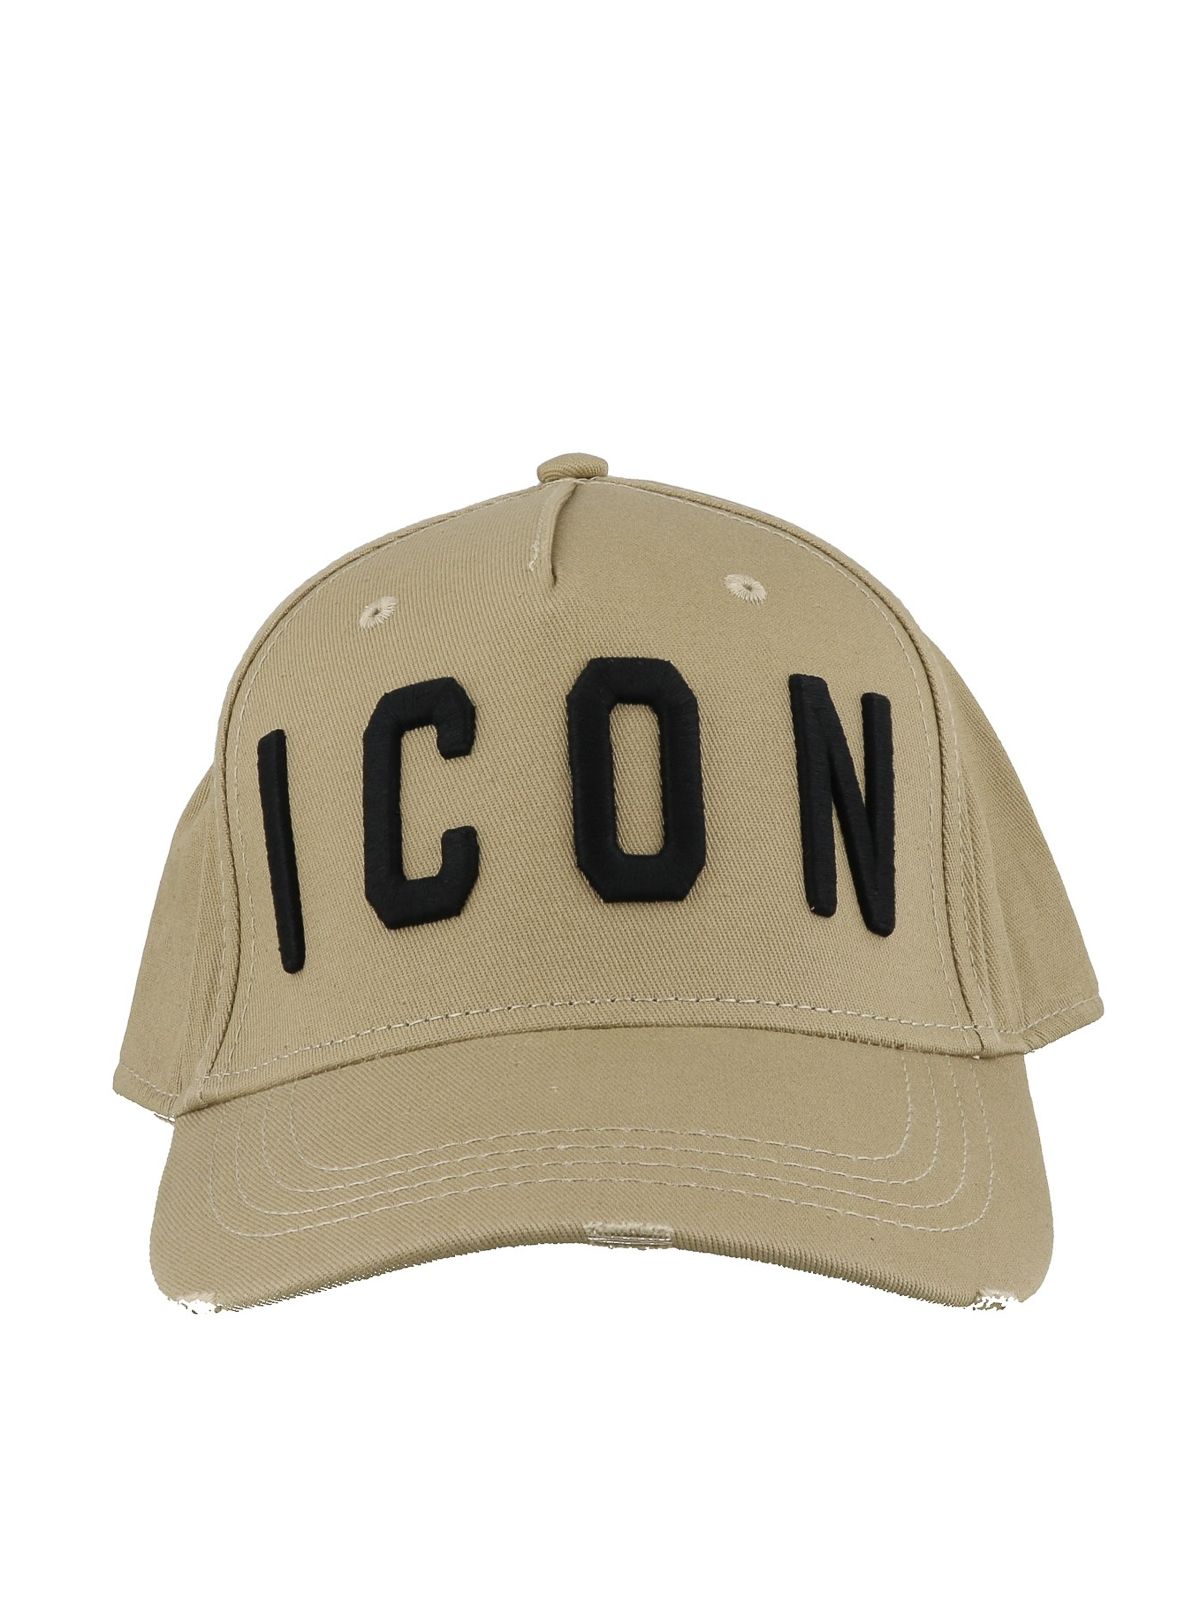 toewijzing Actie Vuil Hats & caps Dsquared2 - Icon beige and black baseball cap -  BCM400105C00001M1489